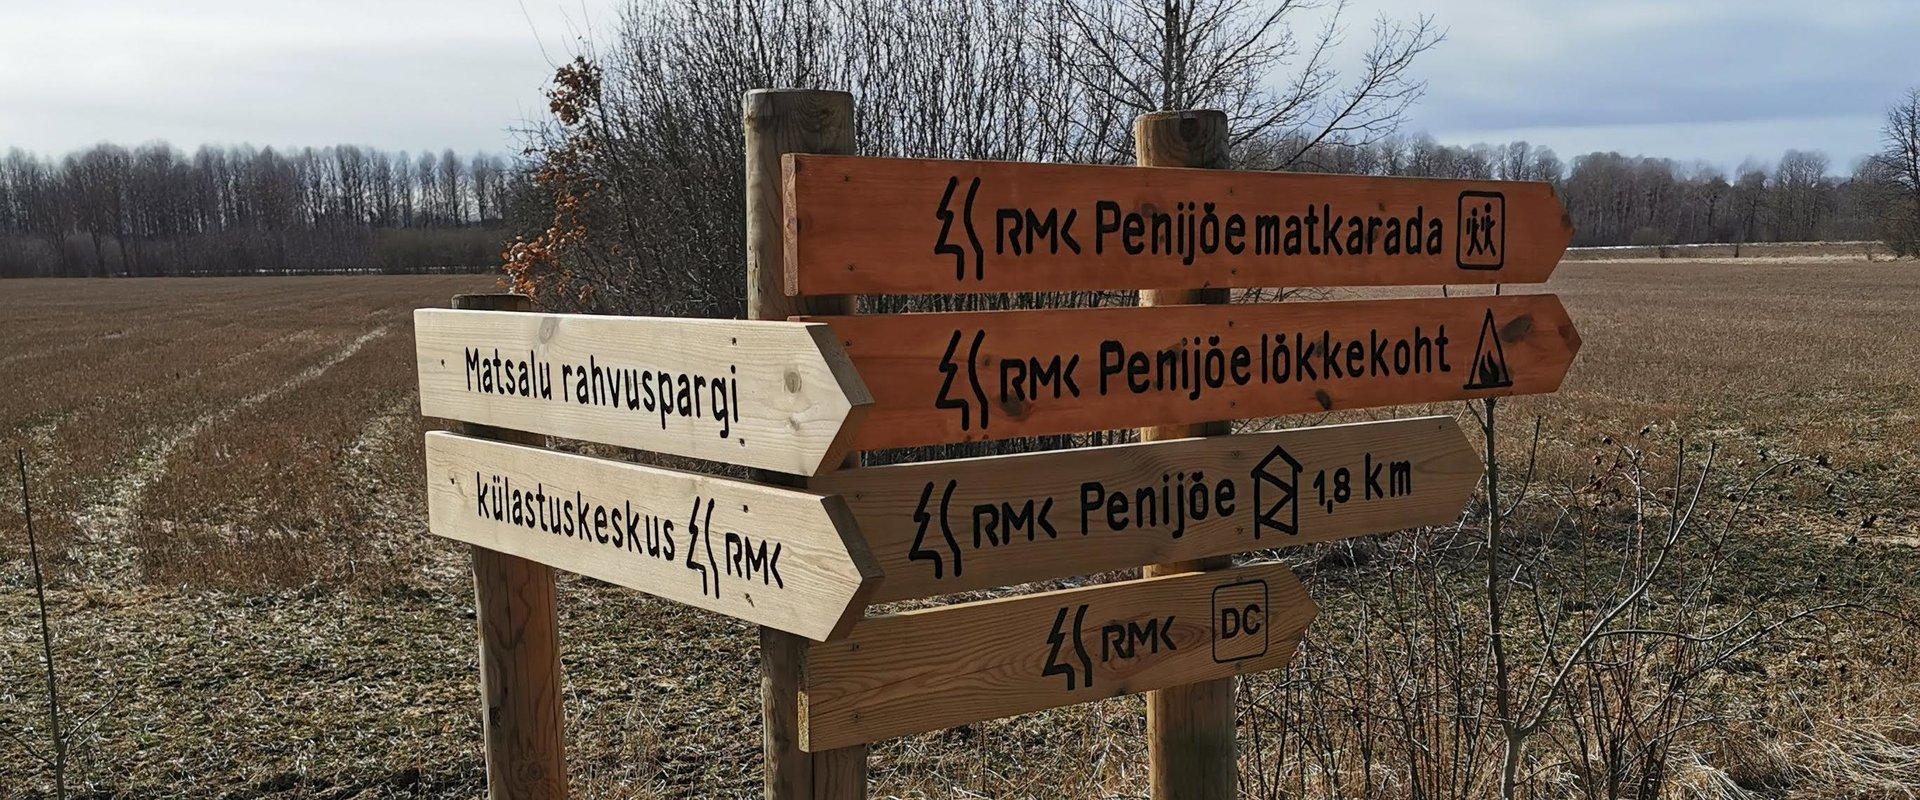 Matsalu National Park is a popular birdwatching area. Come and see the various bird species, as well as the wooded meadows, reeds, meadows, coastal pa